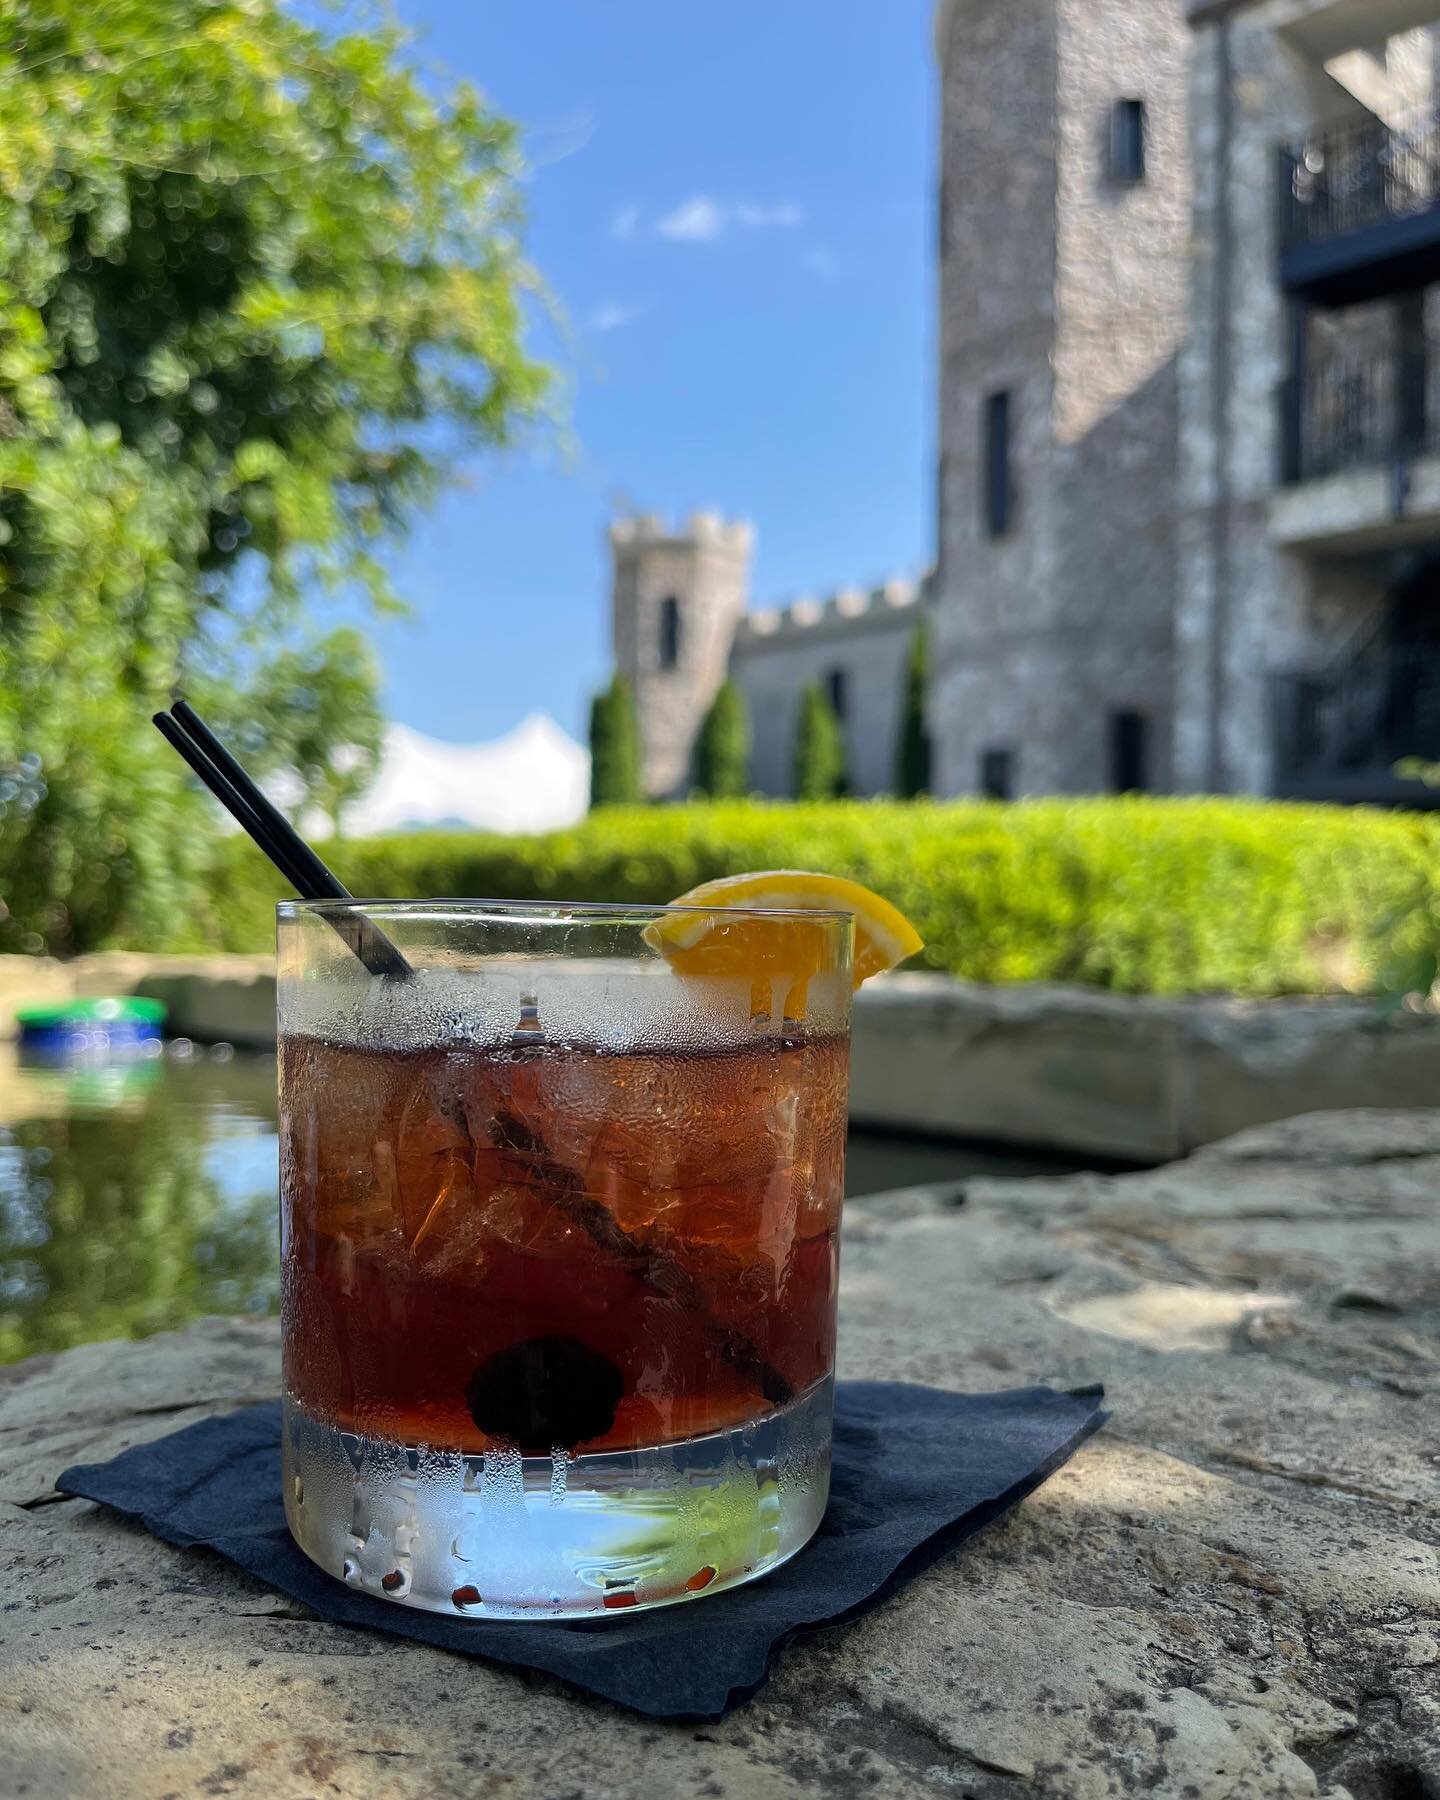 Celebrate National Bourbon Heritage Month and its Kentucky roots at The Kentucky Castle&rsquo;s Bourbon Market on Sunday, September 11th. 

With local vendors and artisans, food trucks, live music, and our mobile bar&hellip;you and your friends will 